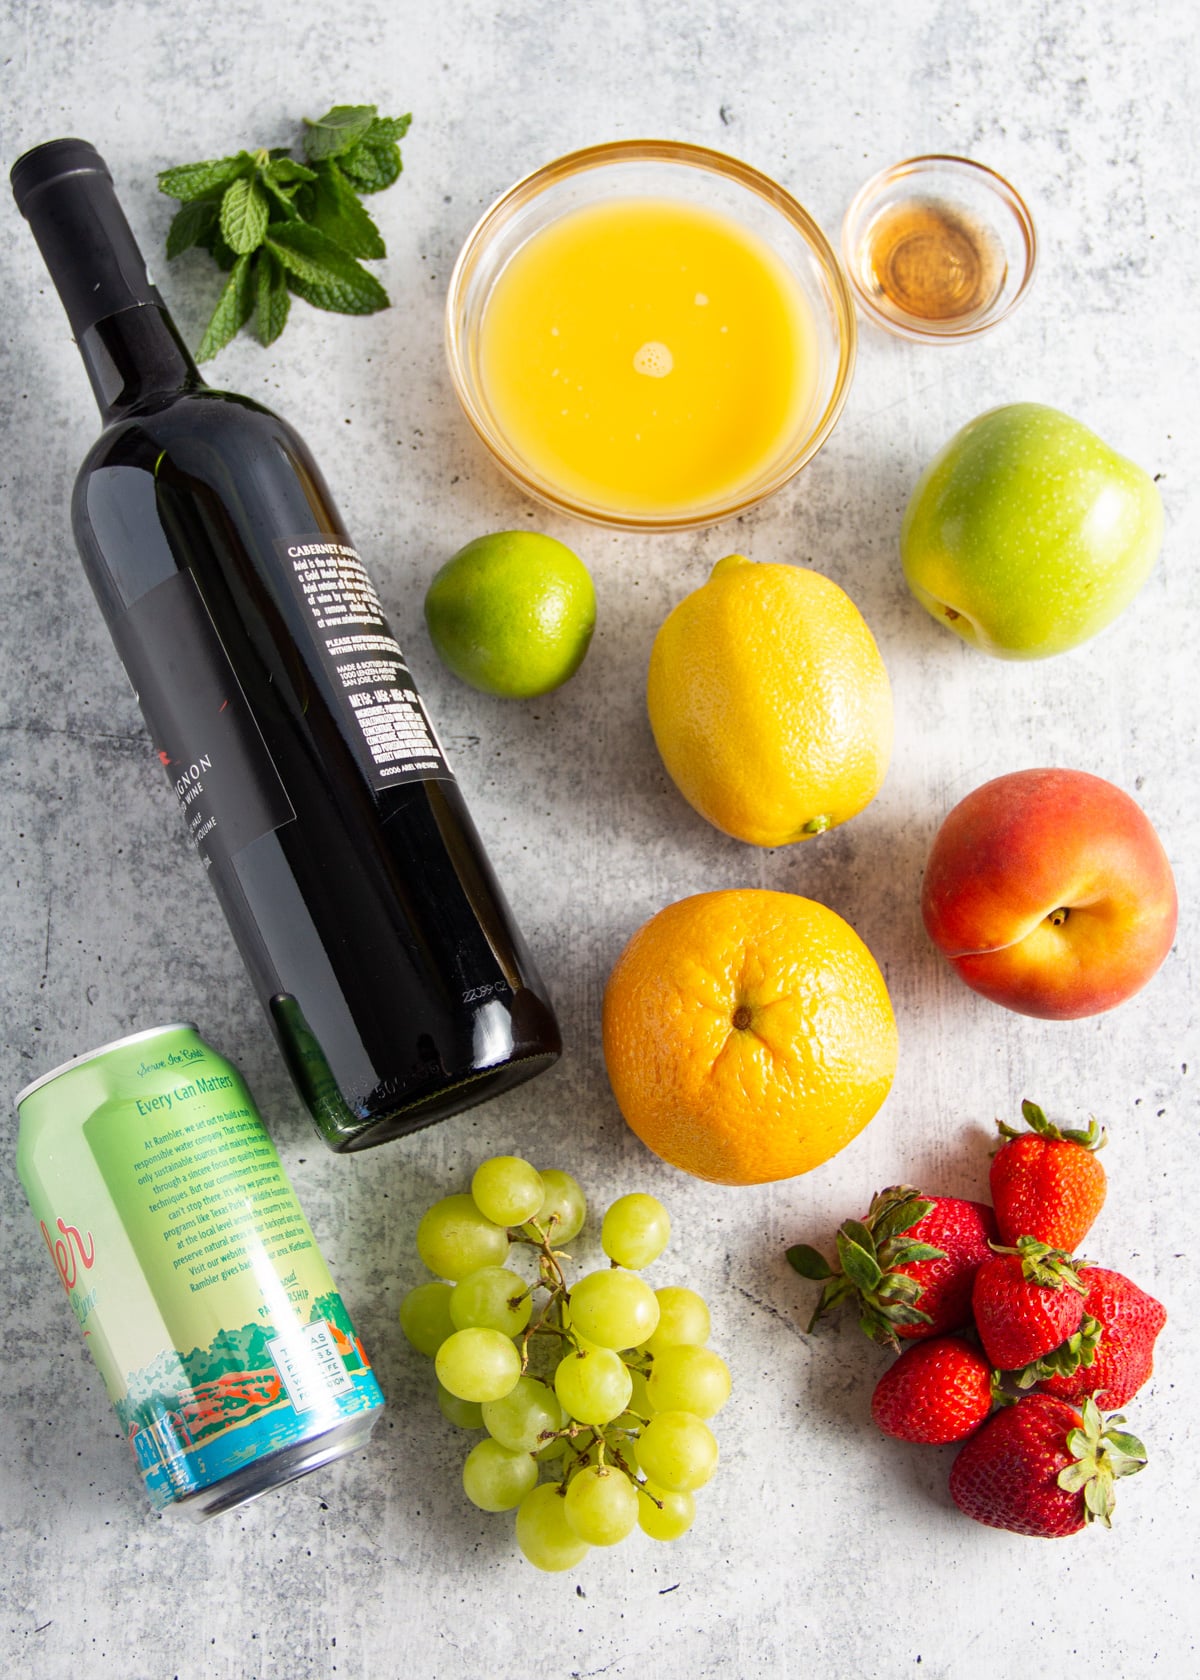 Picture of each individual ingredients for non-alcoholic sangria: alcohol-removed wine, orange juice, agave, orange, lemon, lime, strawberries, apple, grapes and lemon-lime seltzer.